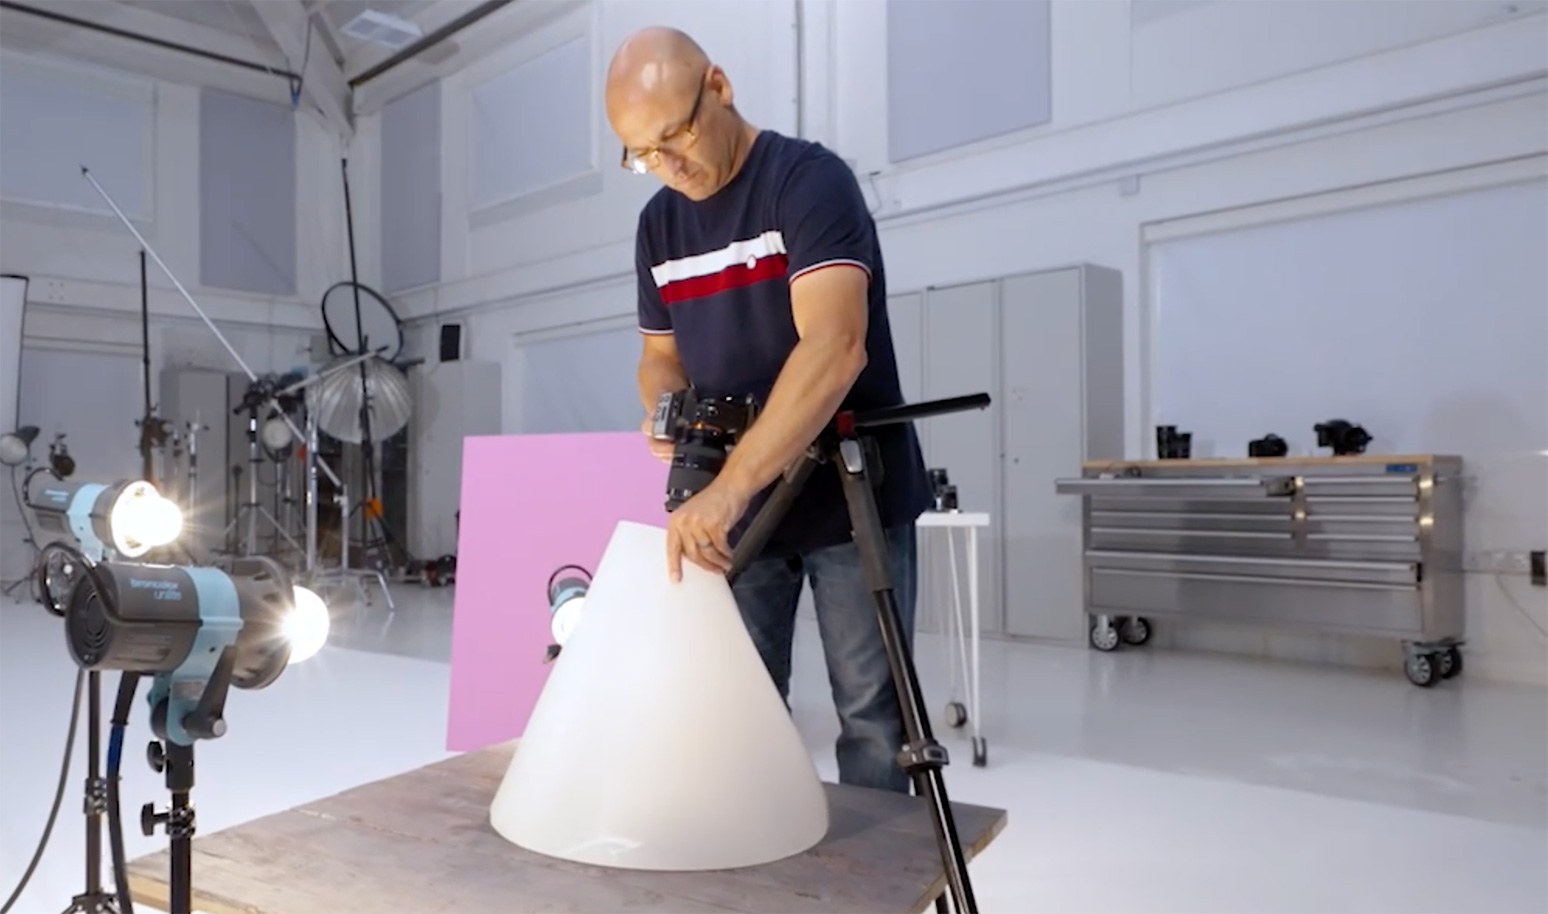 Setting up a light cone using studio lamps